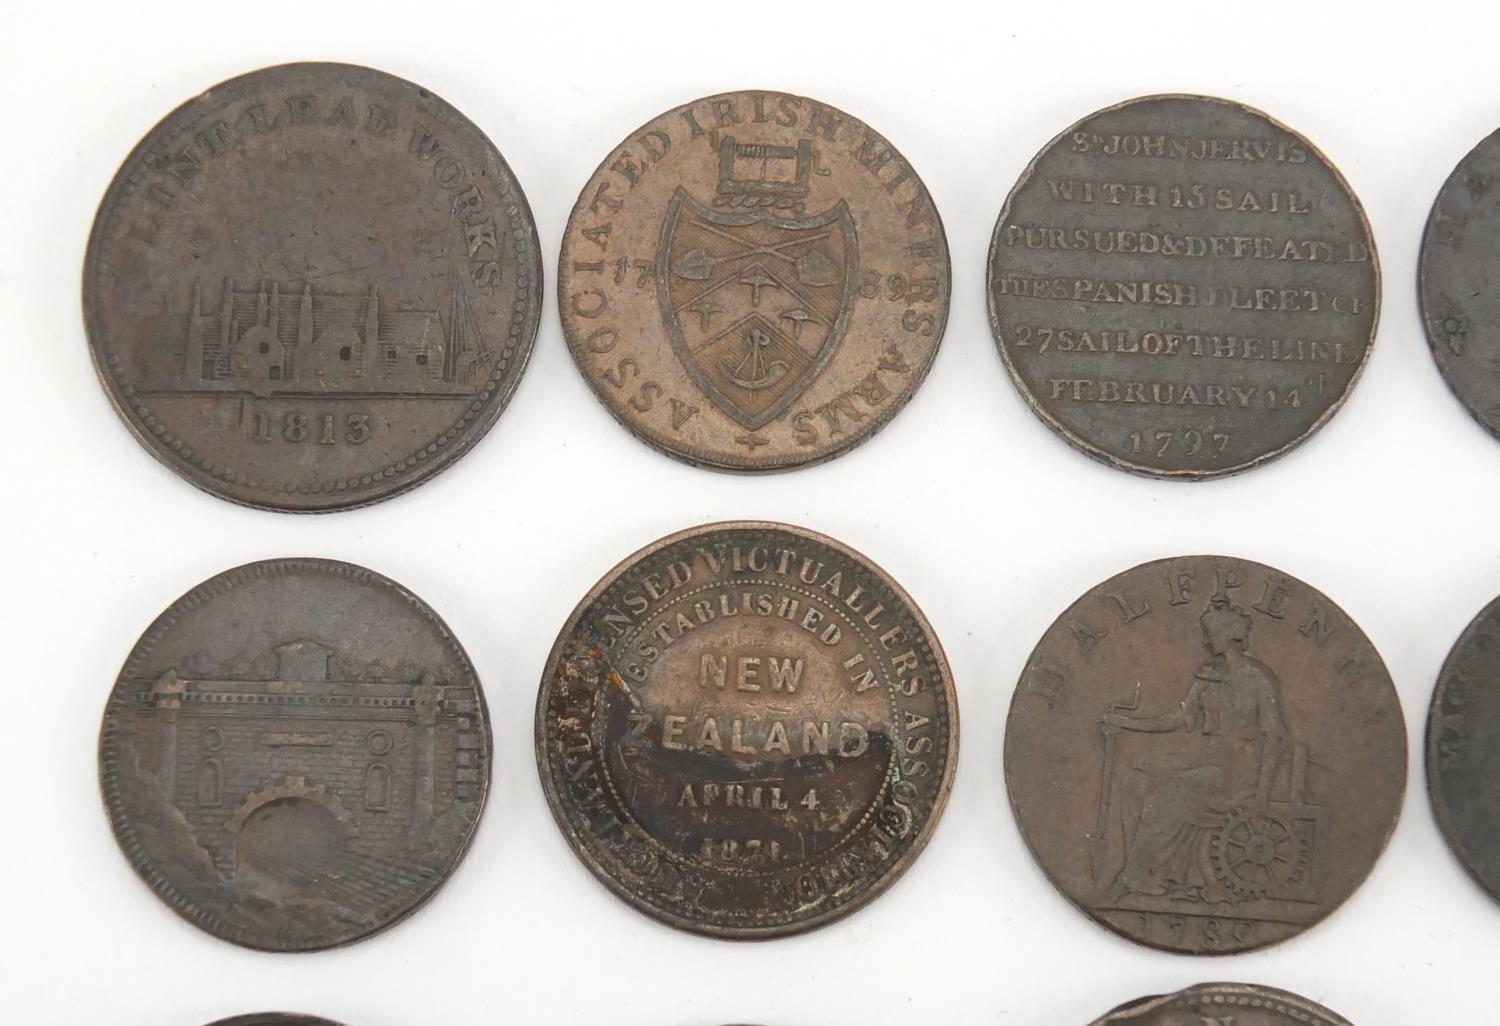 Twenty two late 18th early 19th century tokens and half pennies including Iohn of Gaunt Duke of - Image 7 of 10